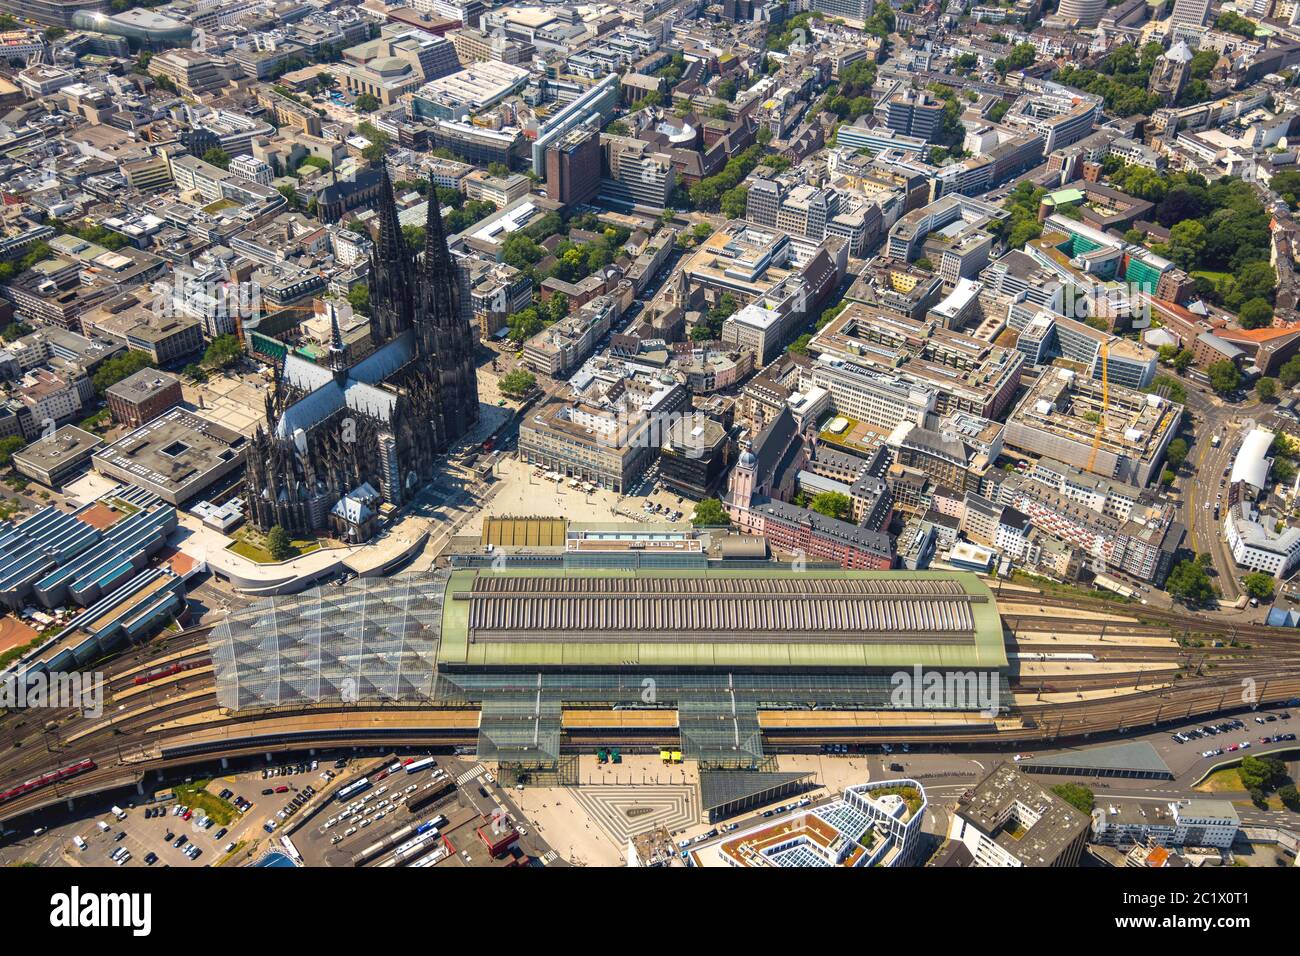 city centre of Cologne with cathedral and main station, 05.06.2020, Luftbild, Germany, North Rhine-Westphalia, Rhineland, Cologne Stock Photo